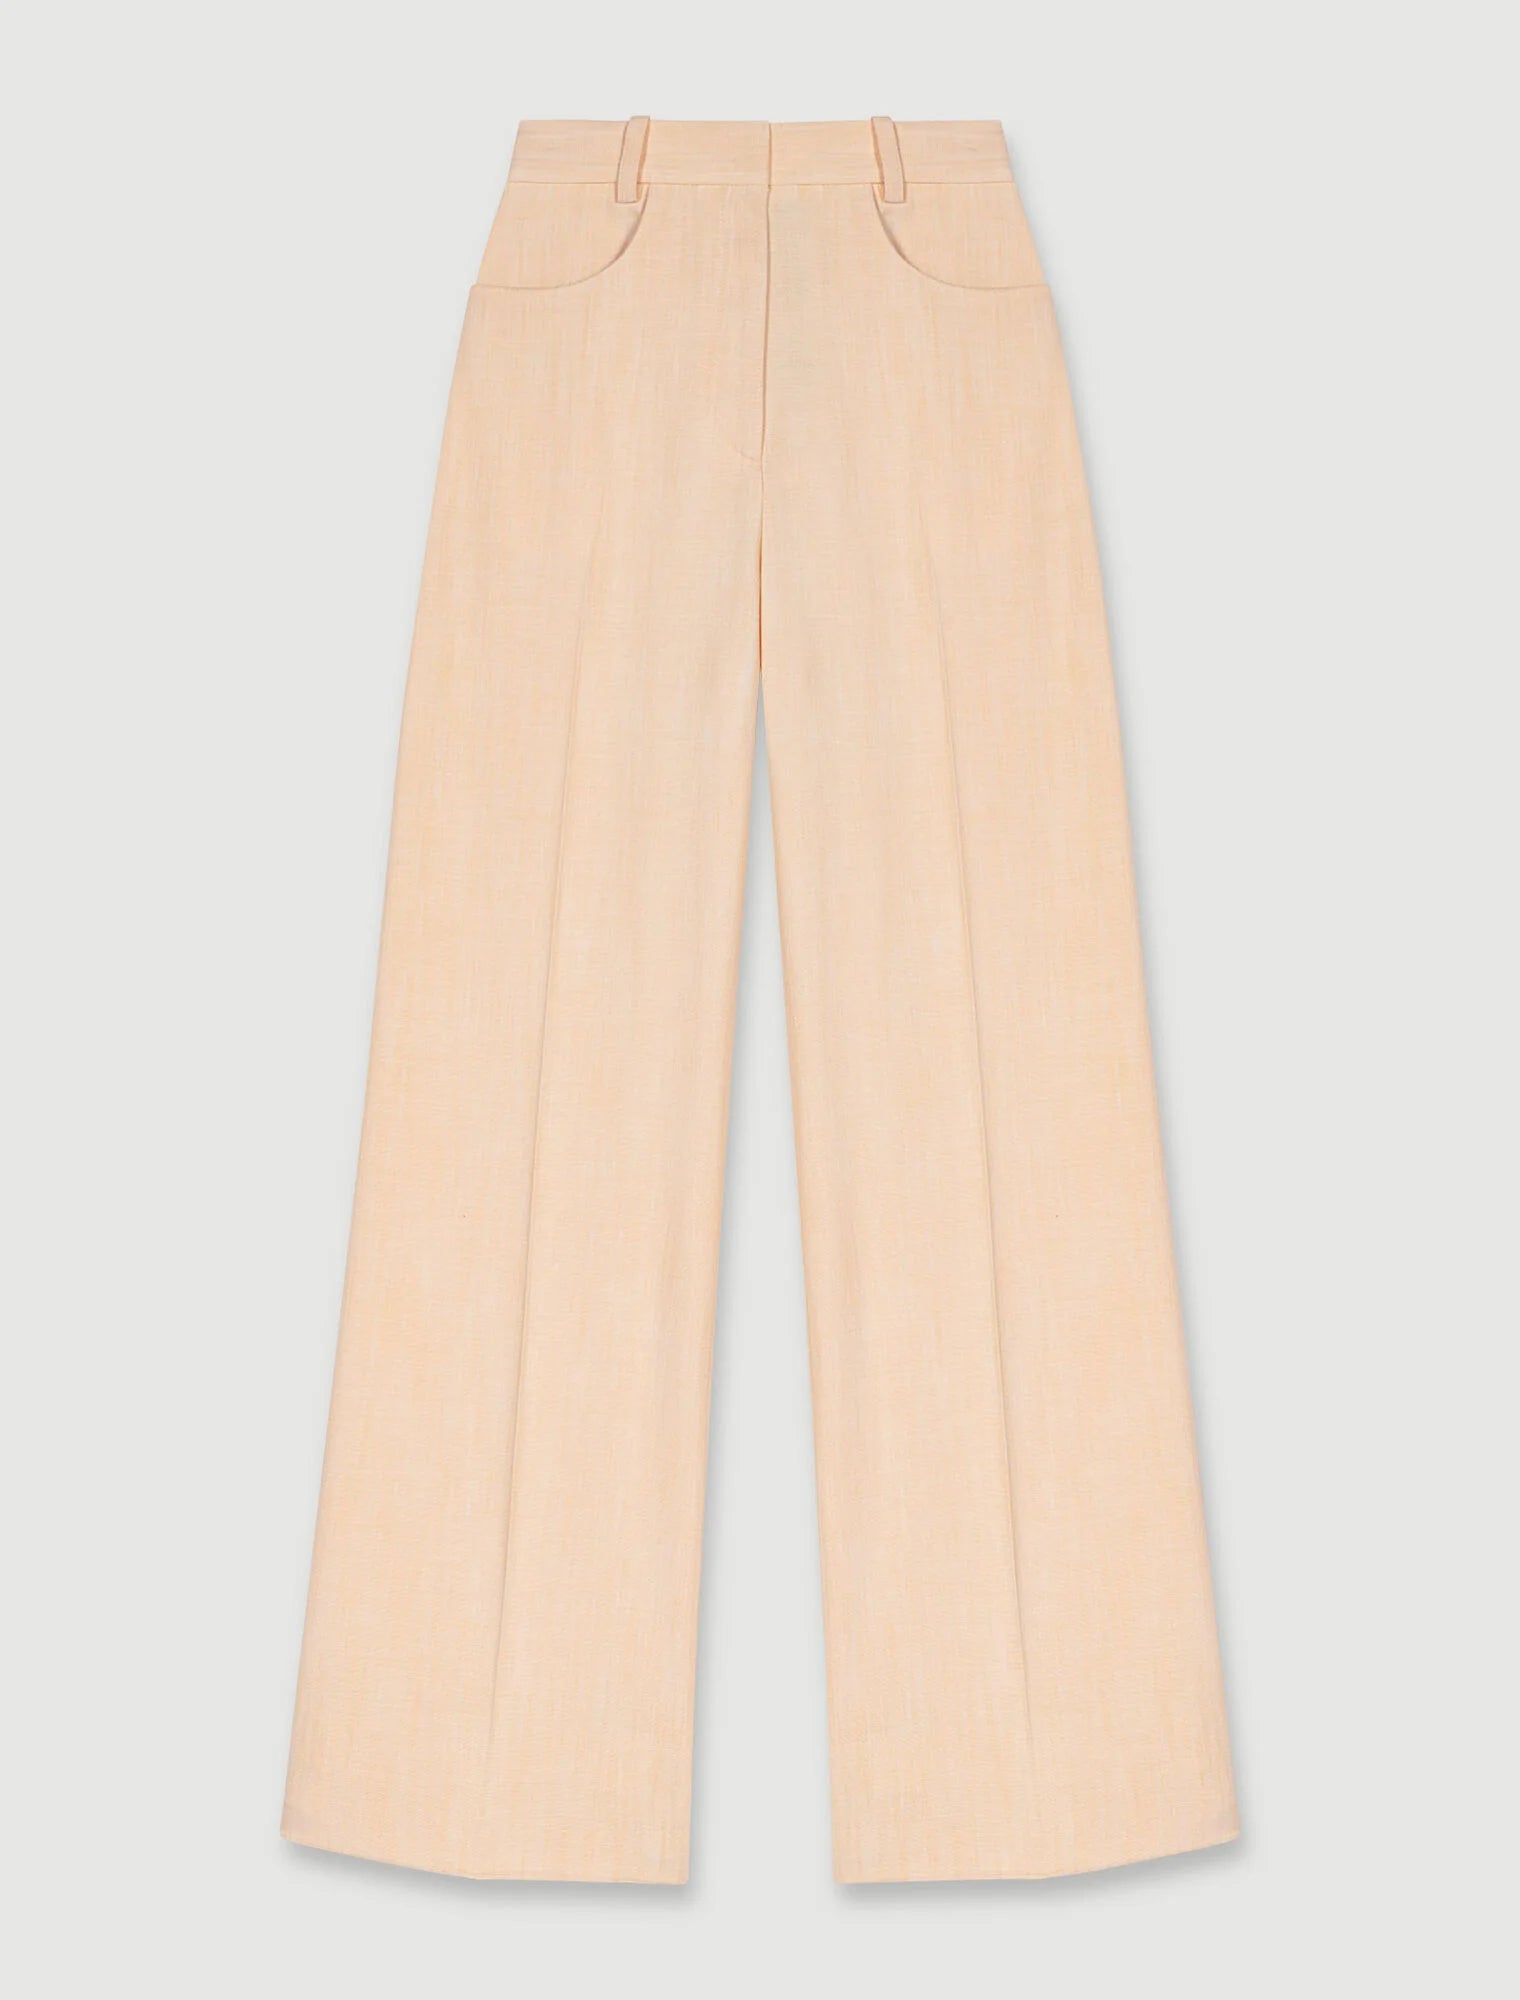 Yellow Banana-Suit trousers